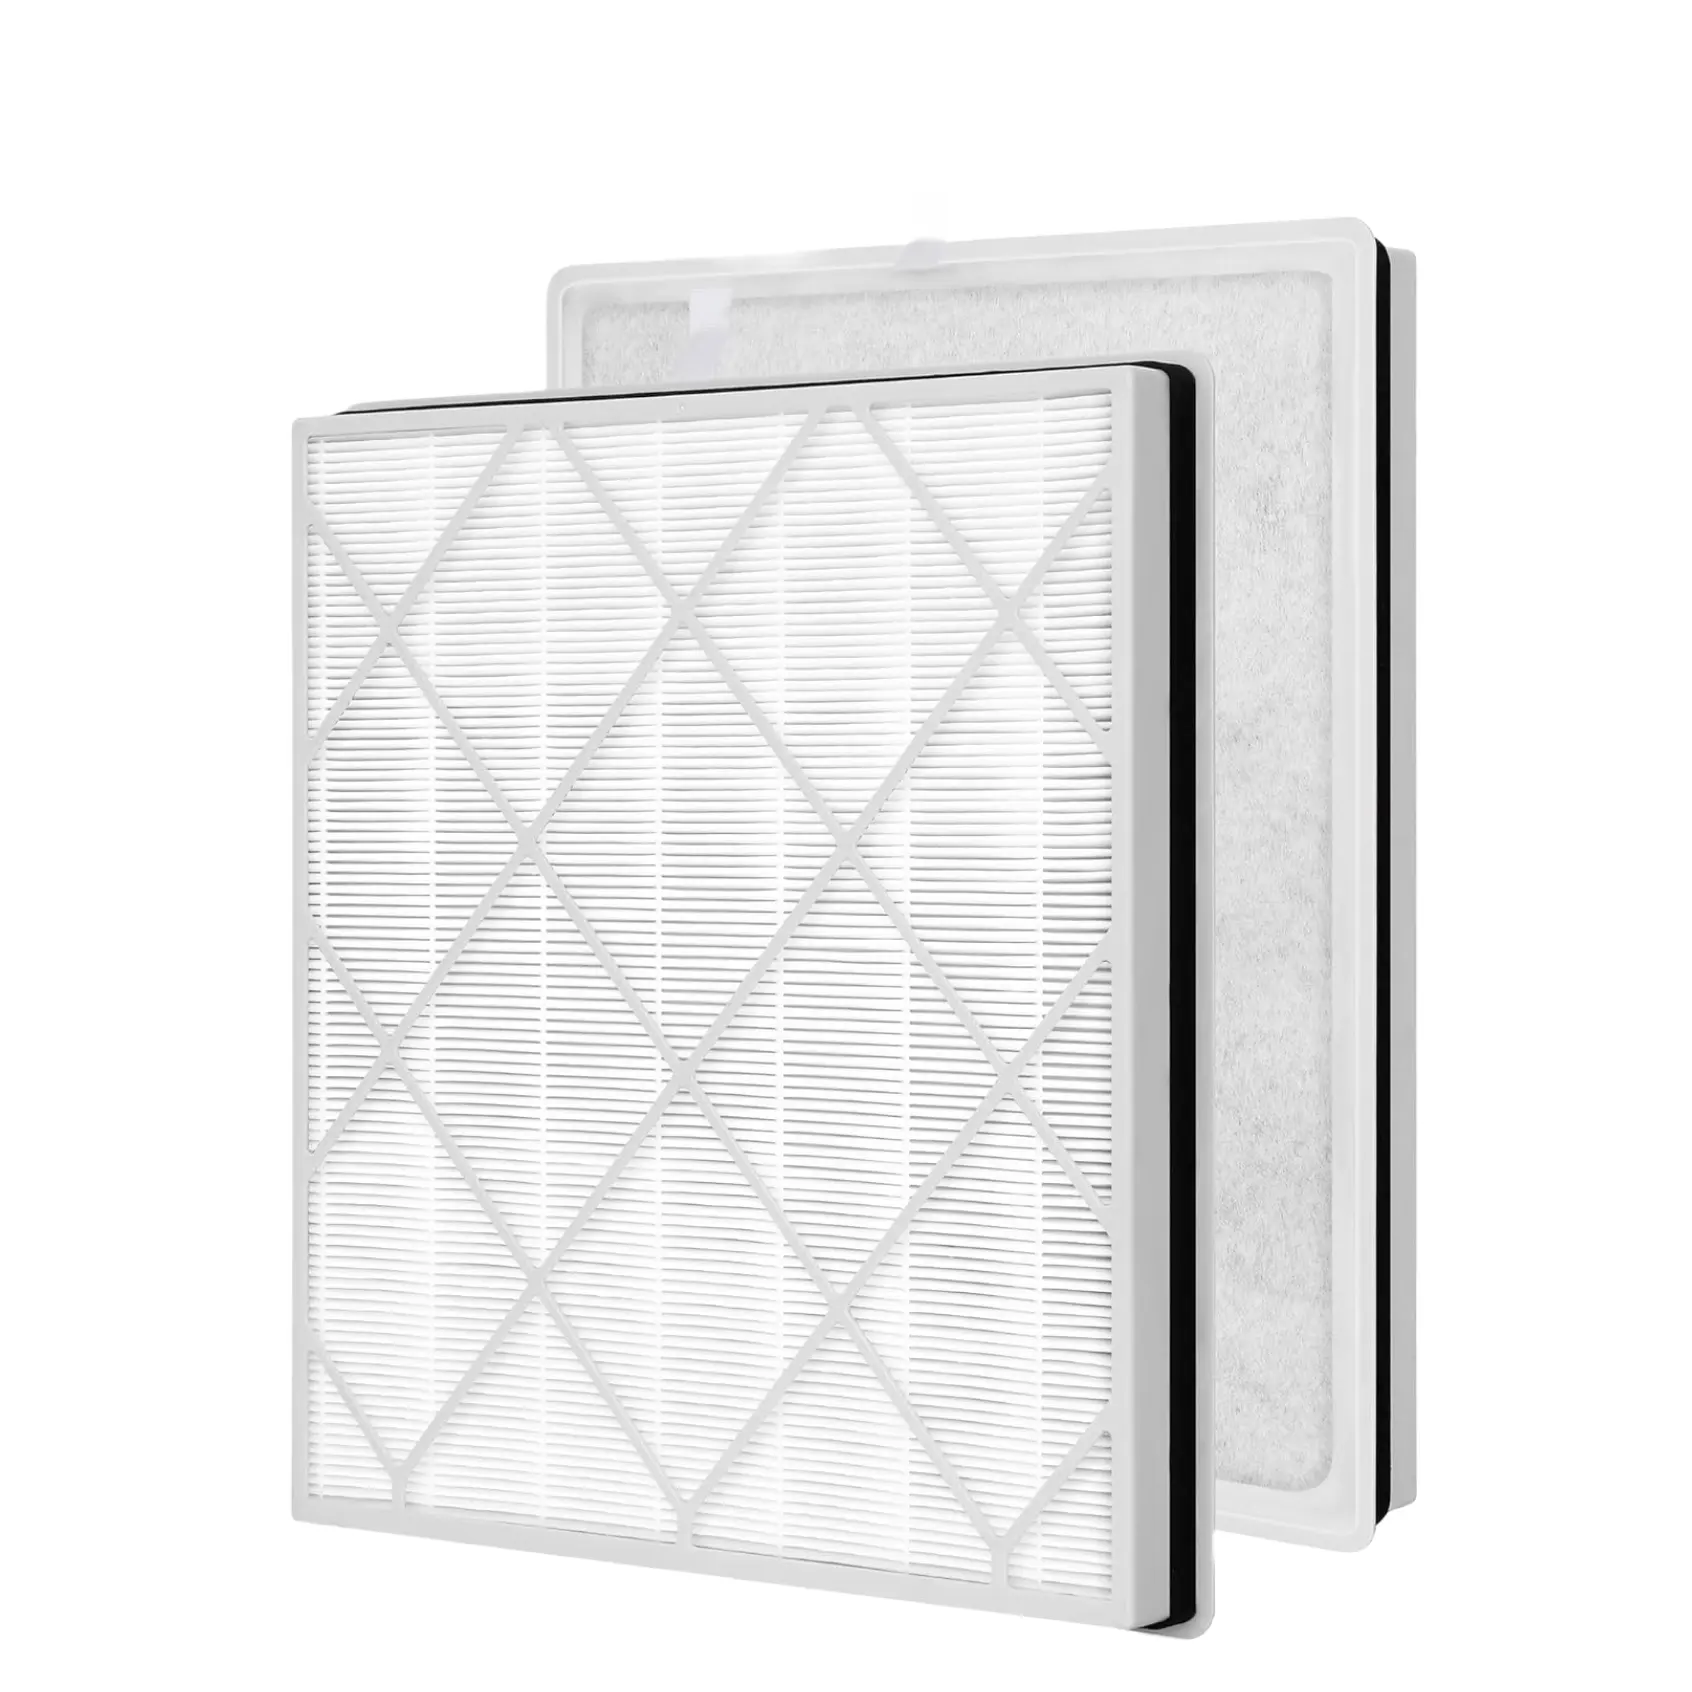 The New Listing Air Purifier Hepa Filter Carbon Filter Media Customized Hvac Air Filter